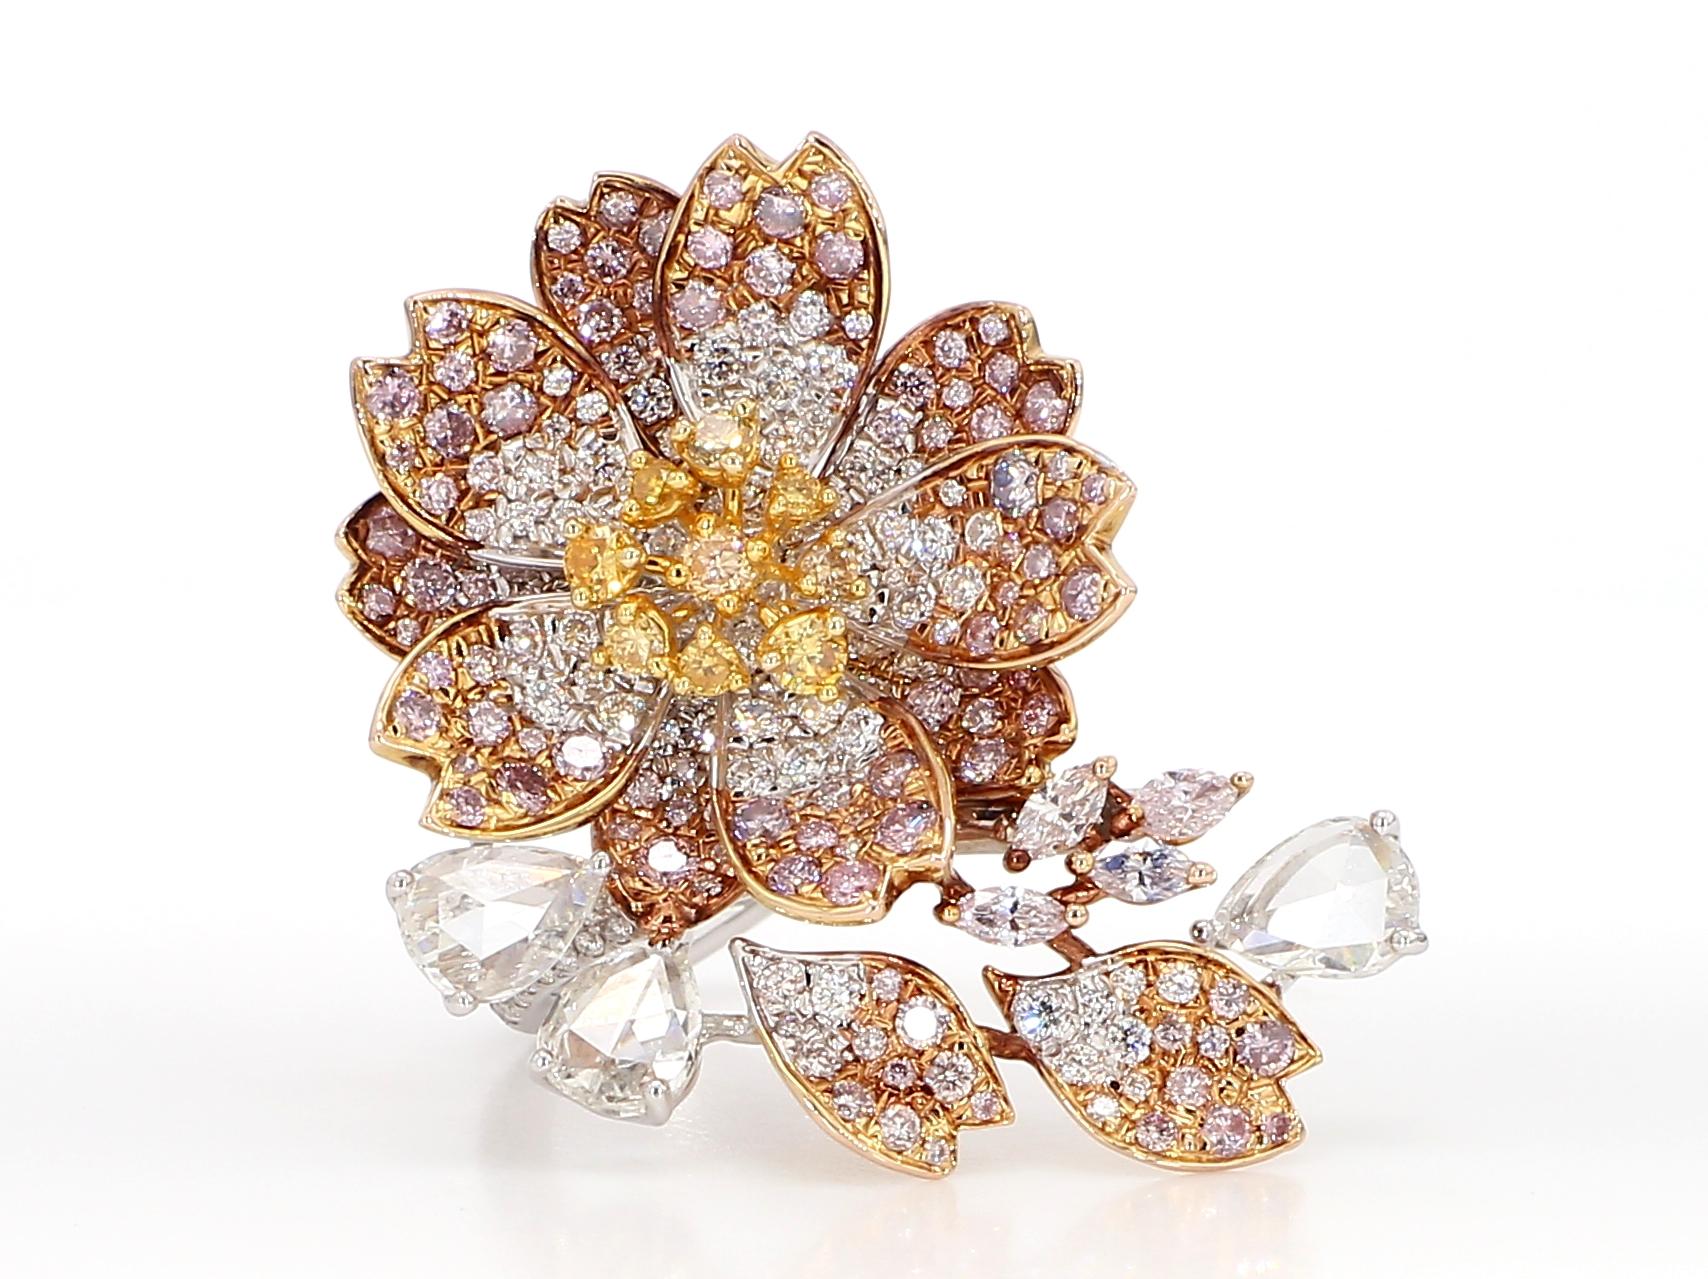 2.67 Carat Pink and Yellow Diamonds, Cocktail Ring, Floral Motif, 18K Rose Gold. For Sale 4